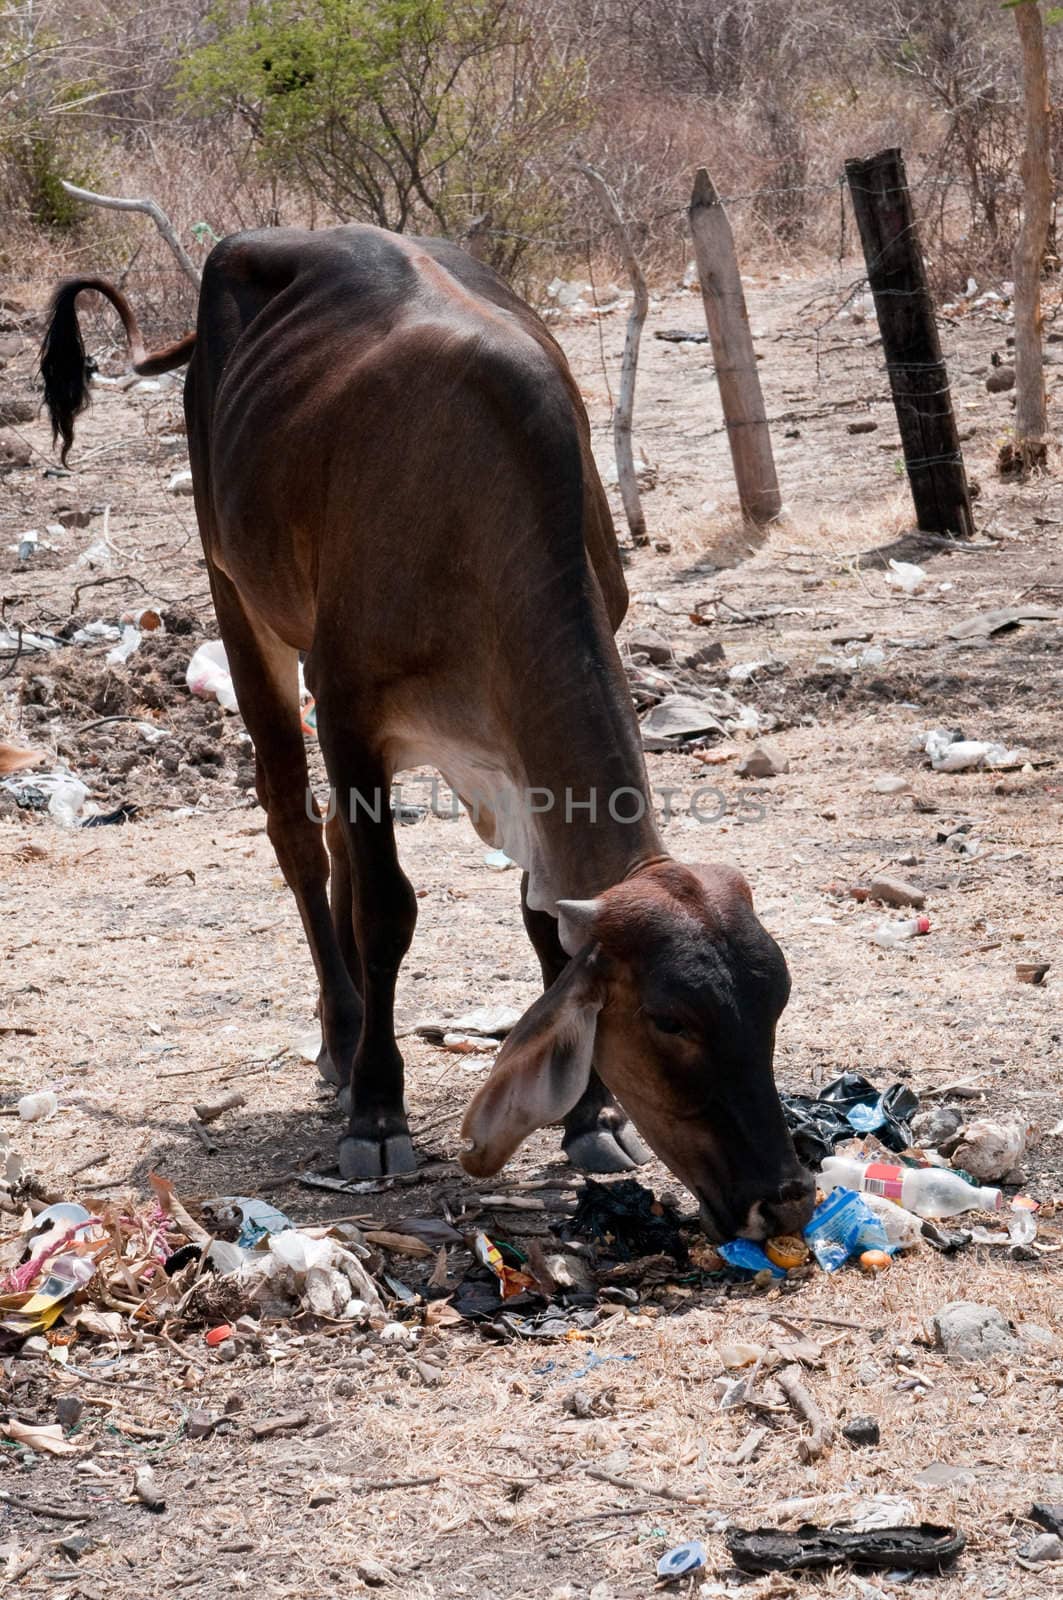 The picture of the nicaraguan cow eating garbage